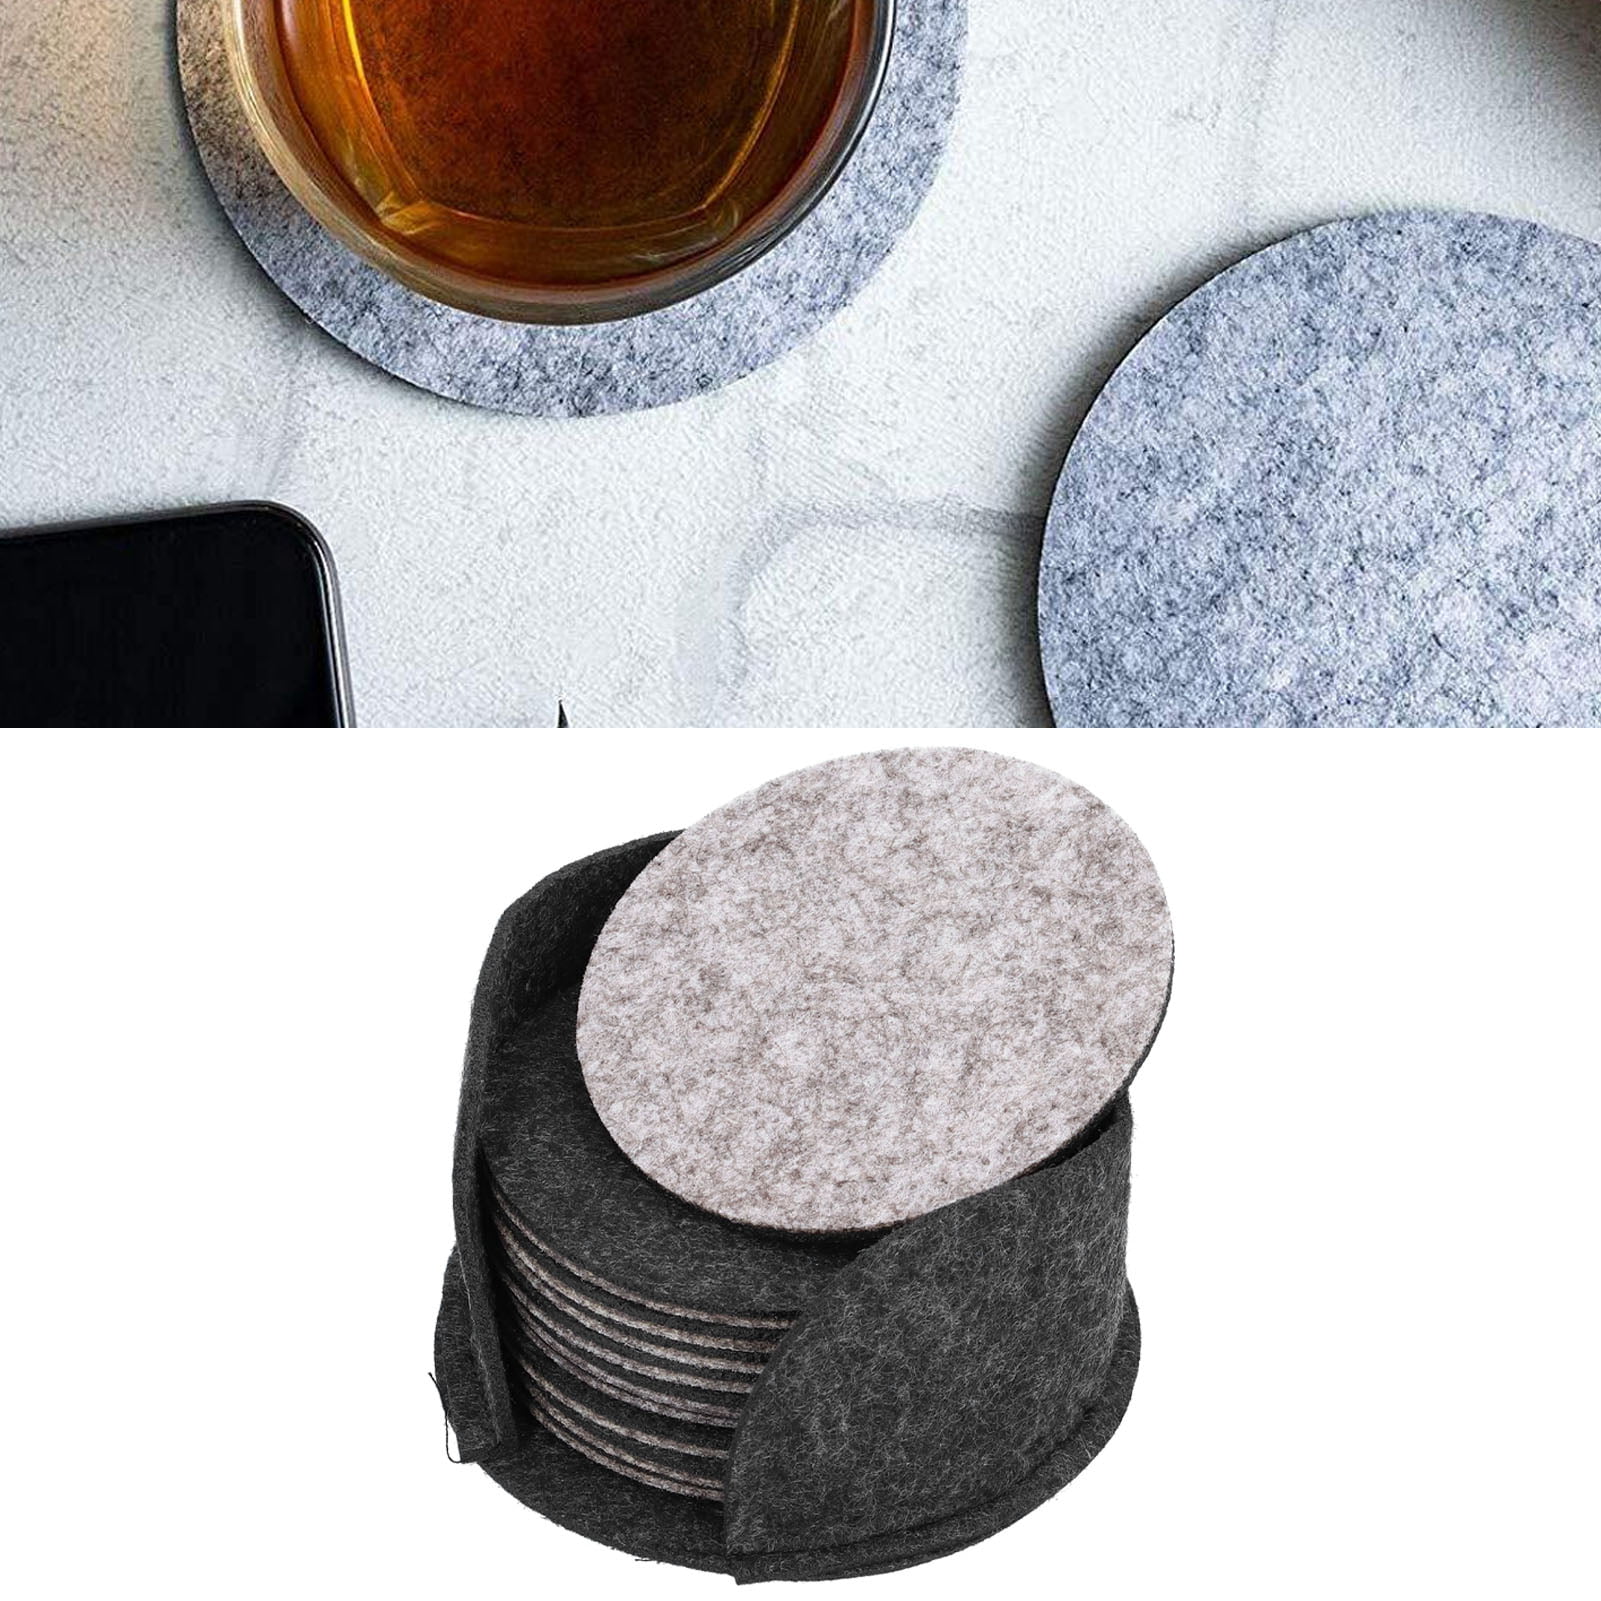 10Pcs Felt Cup Mats Drink Hot Pad Coasters Coffee Table Insulation Non-slip Soft 